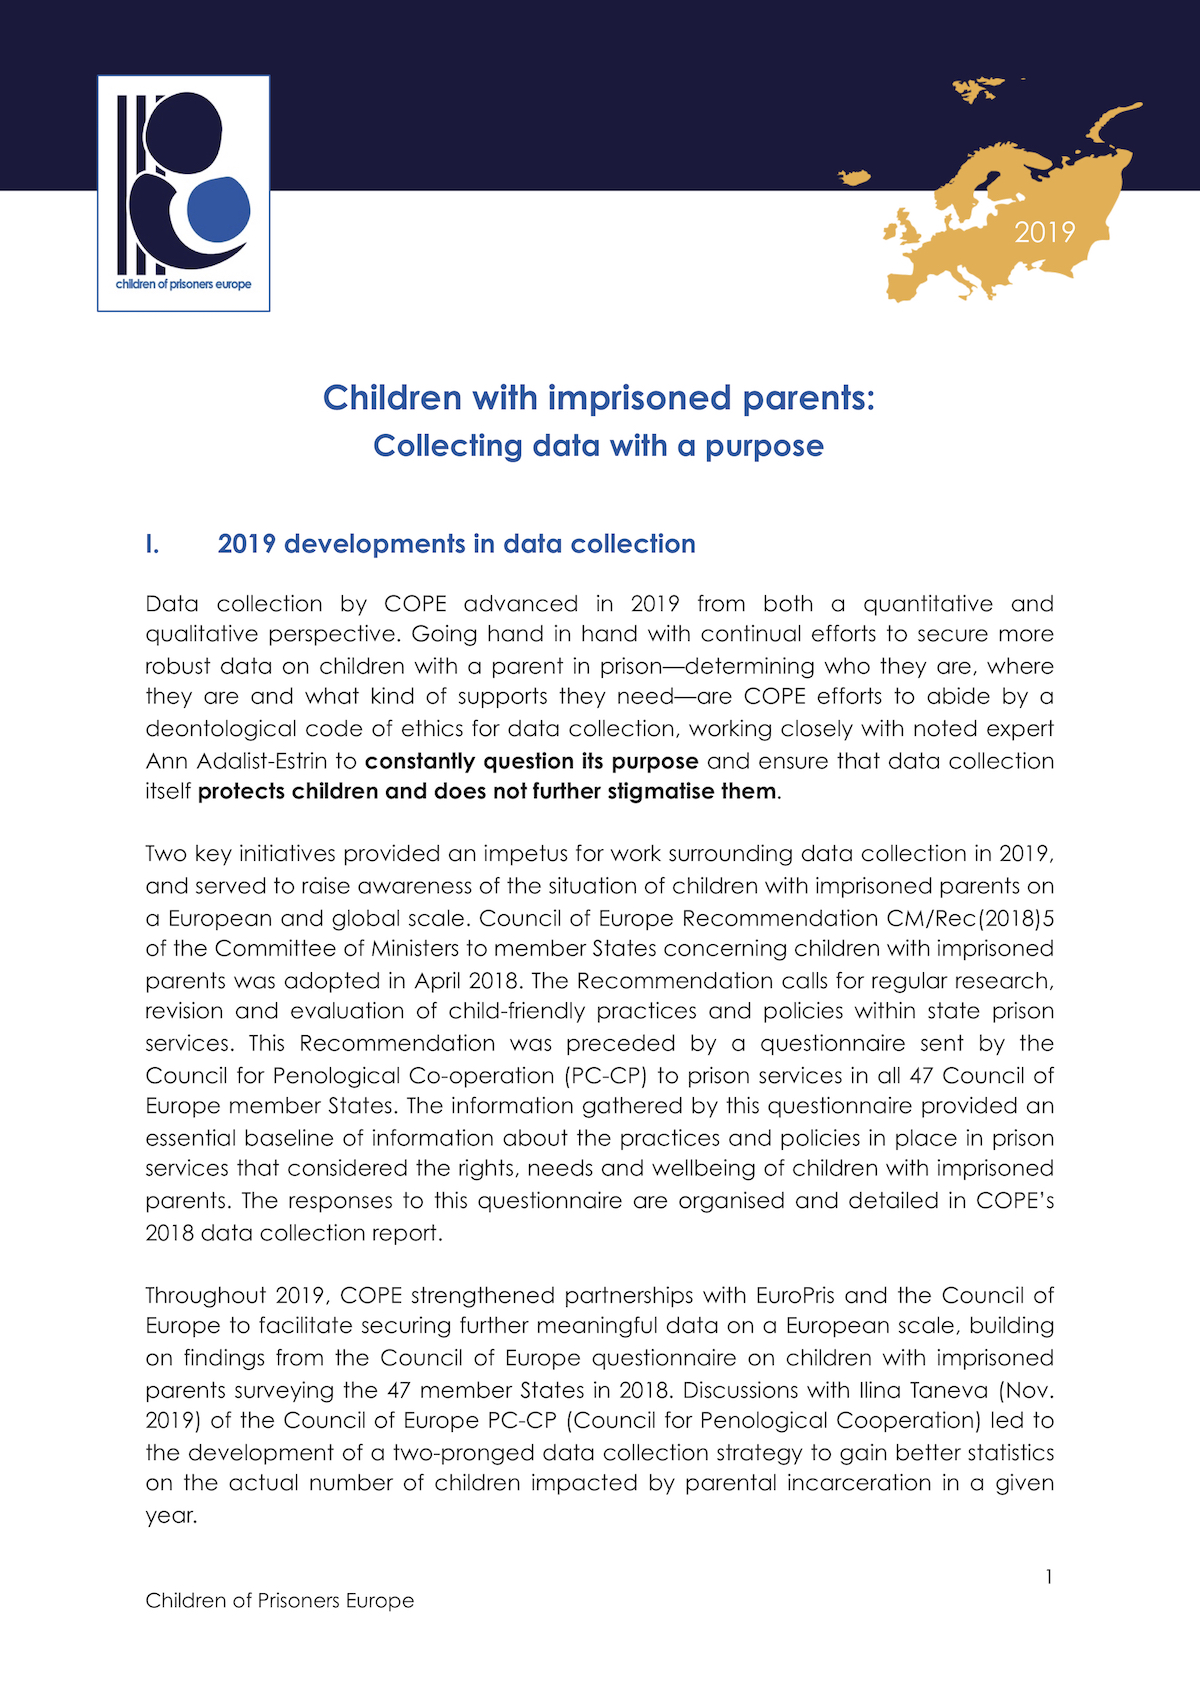 Children with imprisoned parents: collecting data with a purpose (2019)